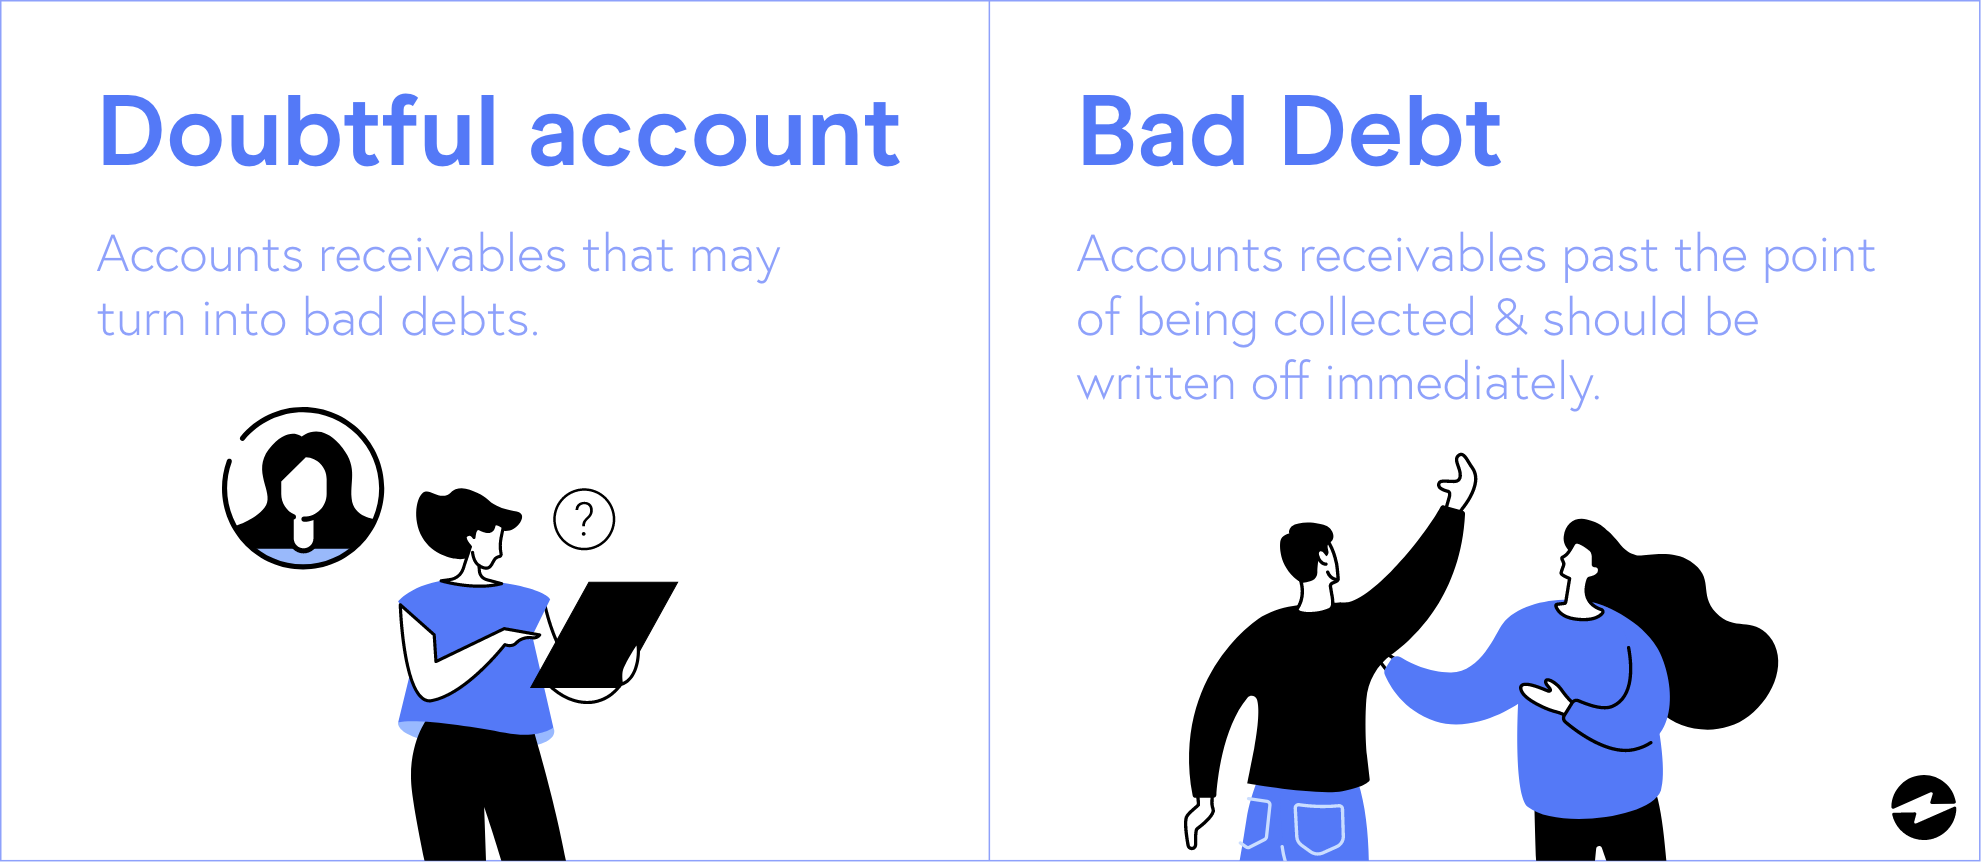 Difference Between Doubtful Account and Bad Debt